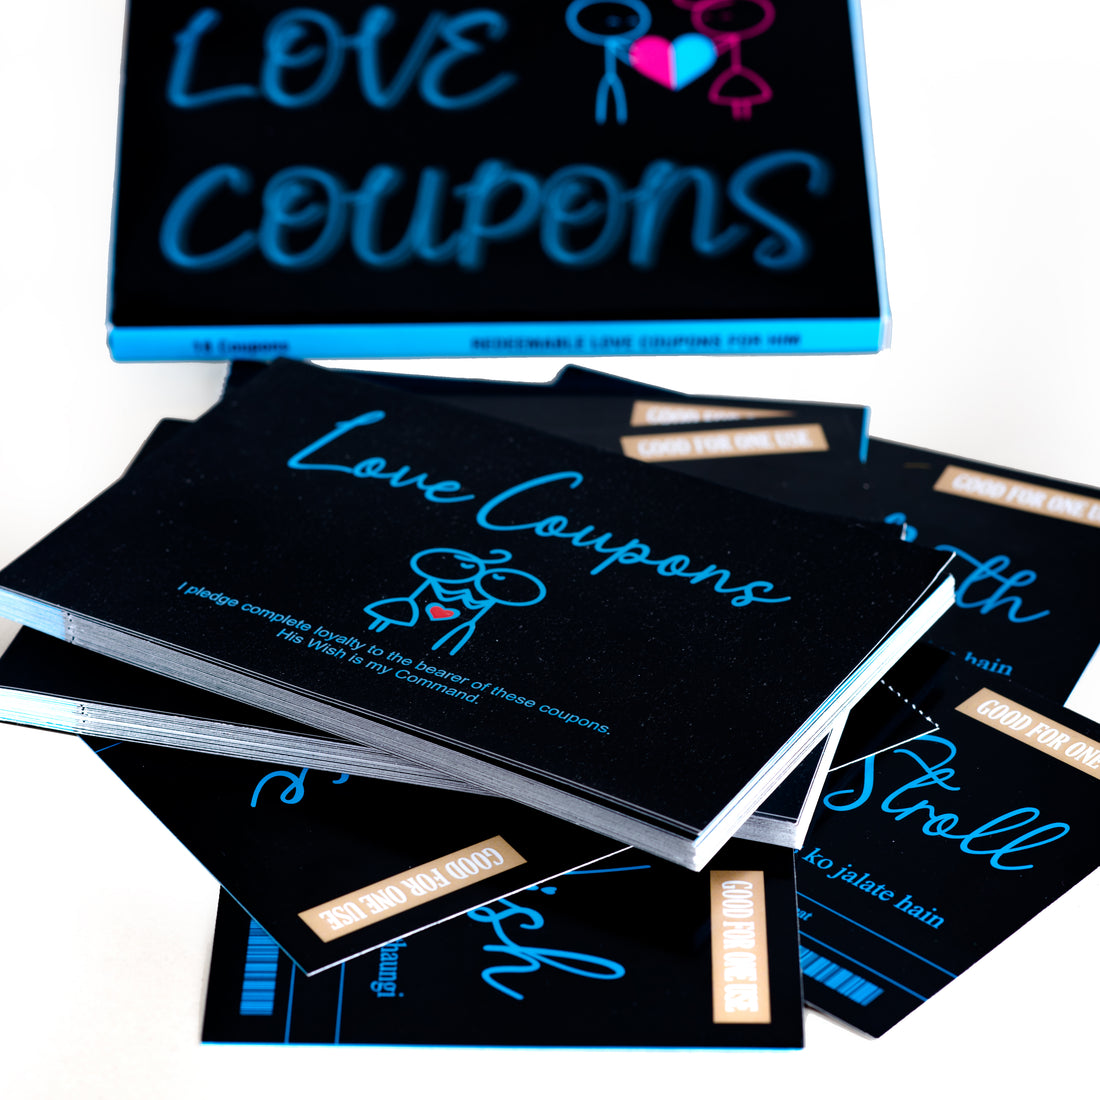 Love Coupons For Him (Blue)